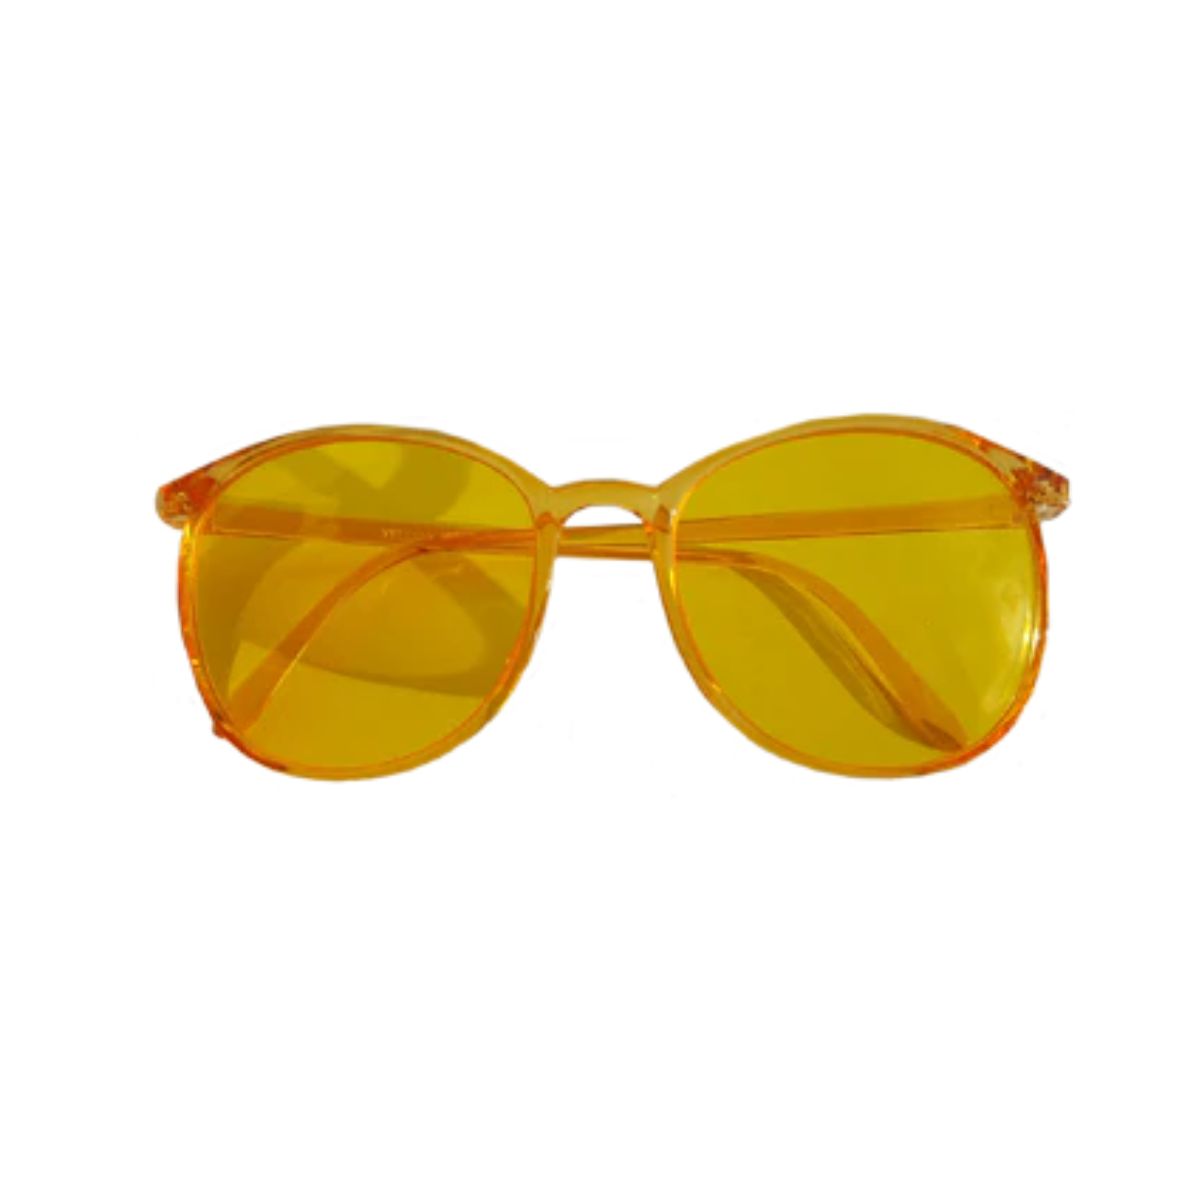 Colour Energy Therapy Glasses ROUND- Yellow